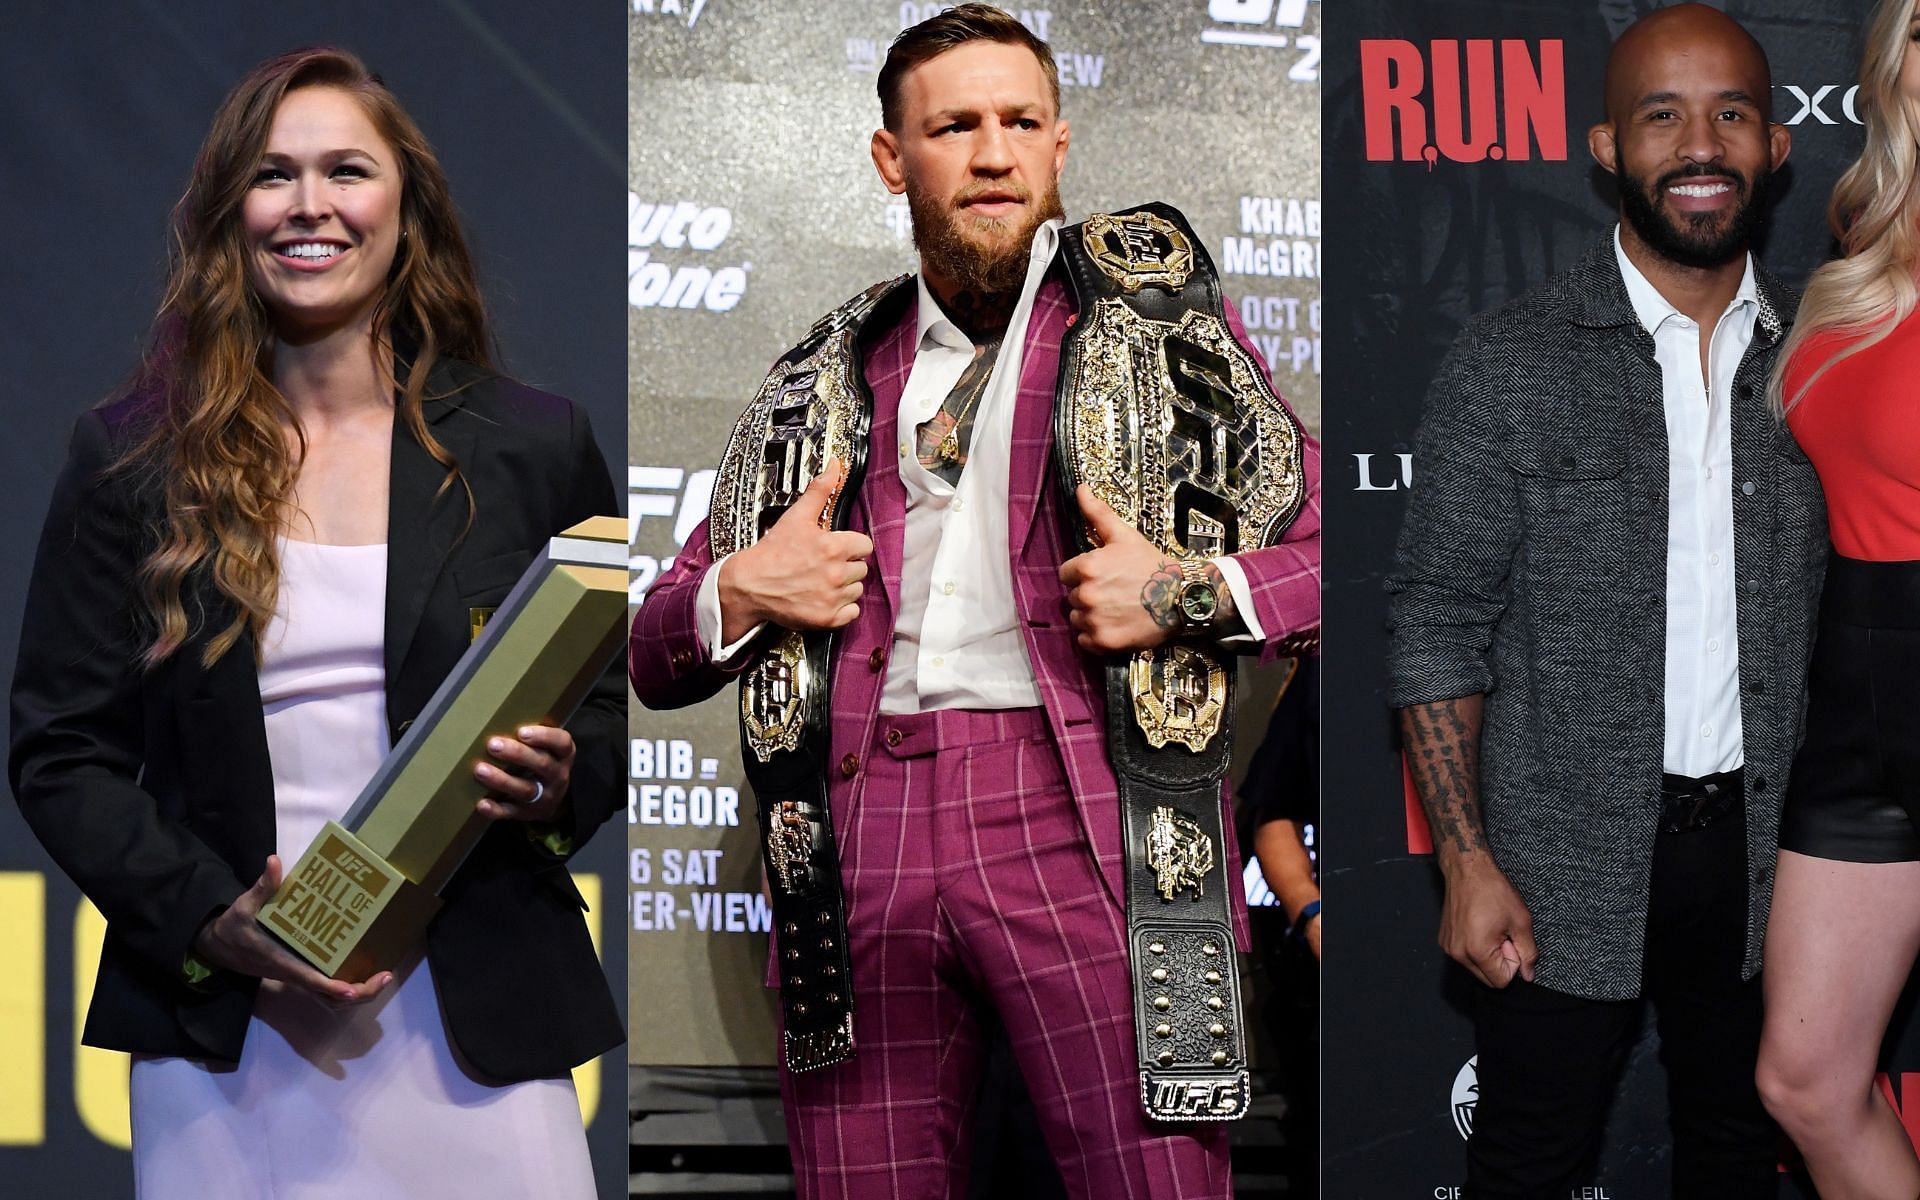 Ronda Rousey (left), Conor McGregor (center), and Demetrious Johnson (right) (Image credits Getty Images)